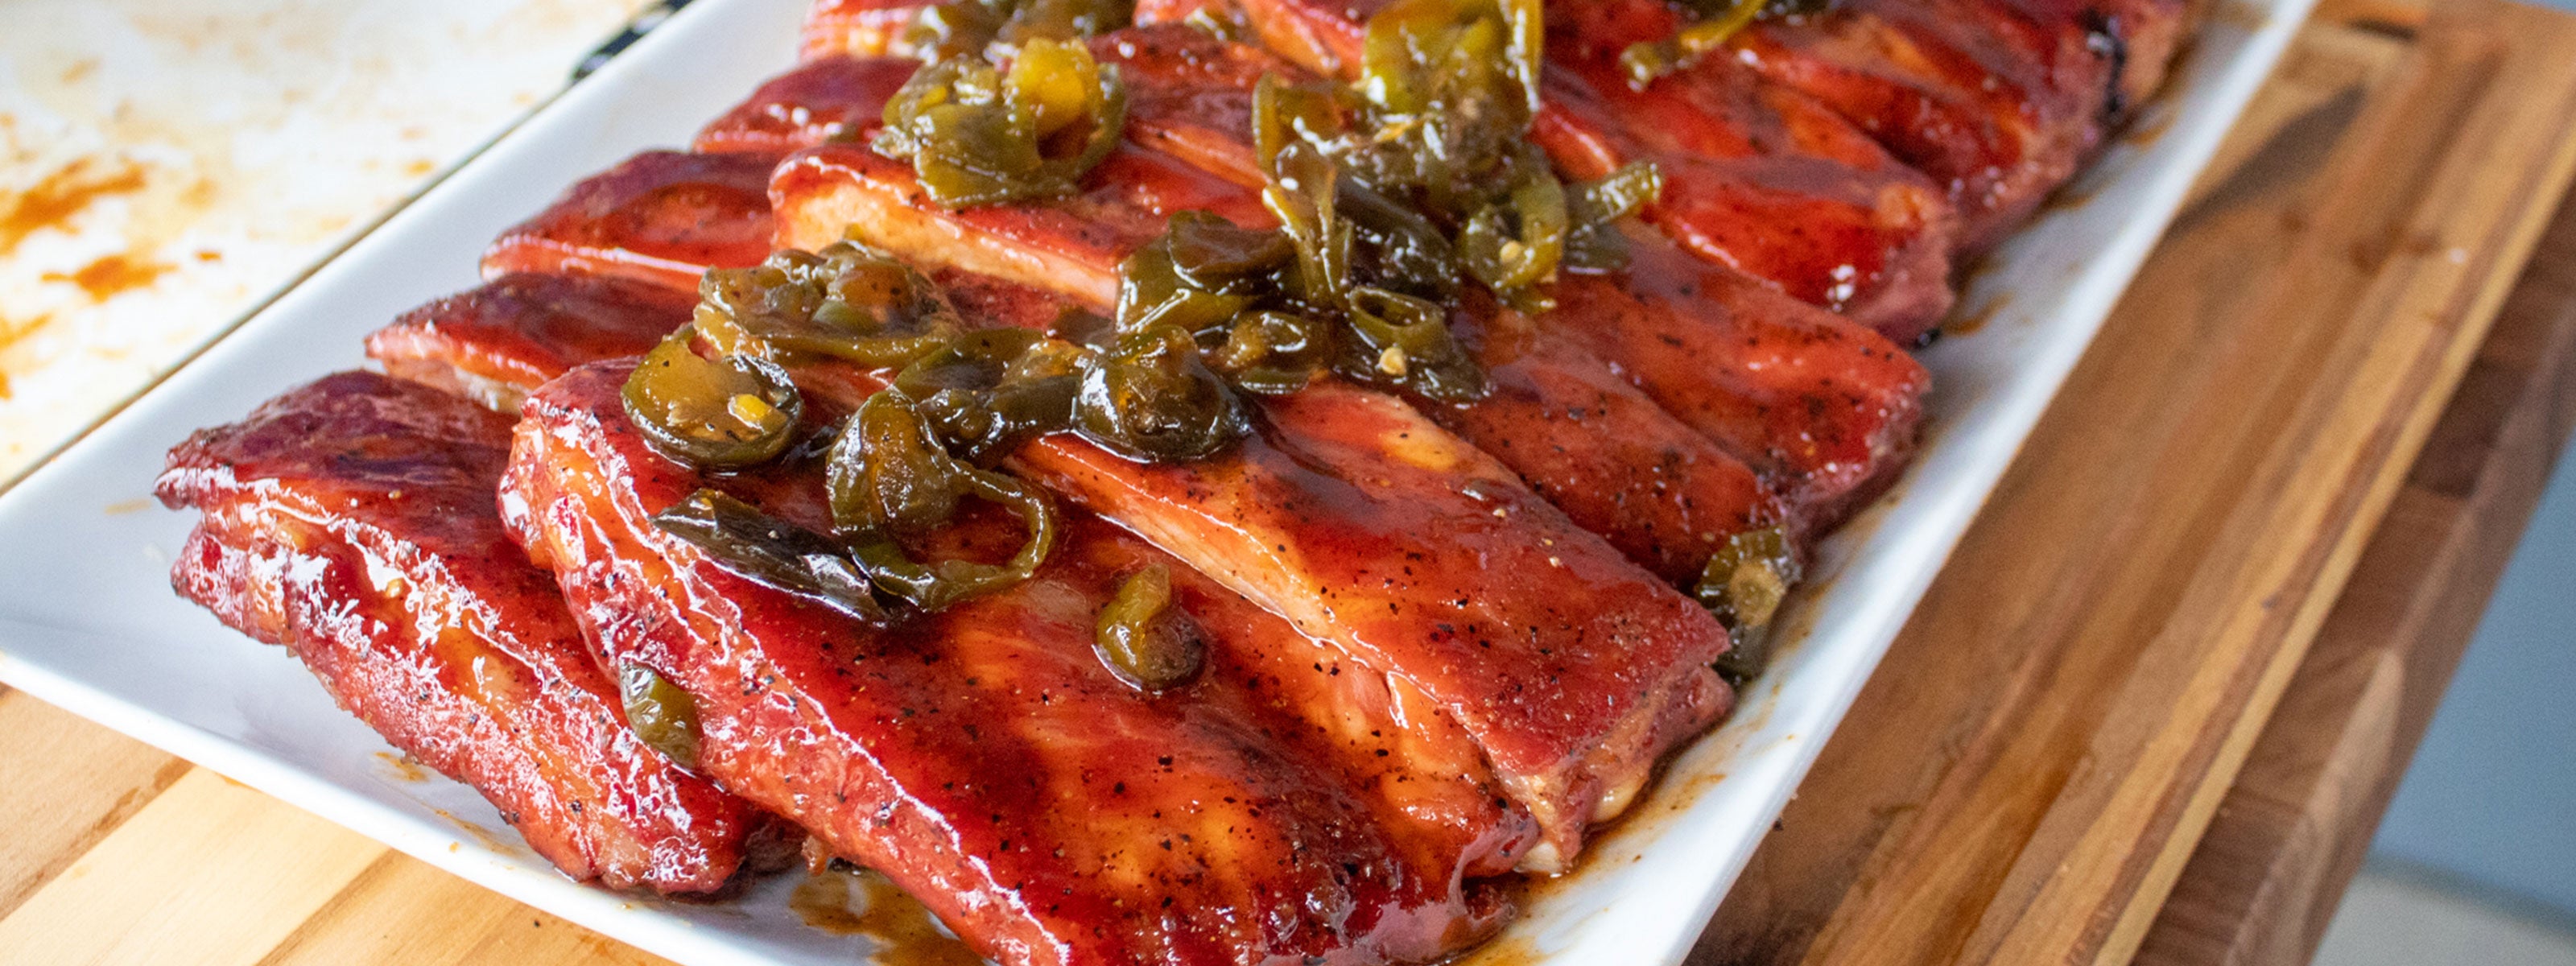 Plate of mouthwatering ribs seasoned with Big Poppa's Sweet Money, topped with Granny's Sauce and slices of jalapeno.